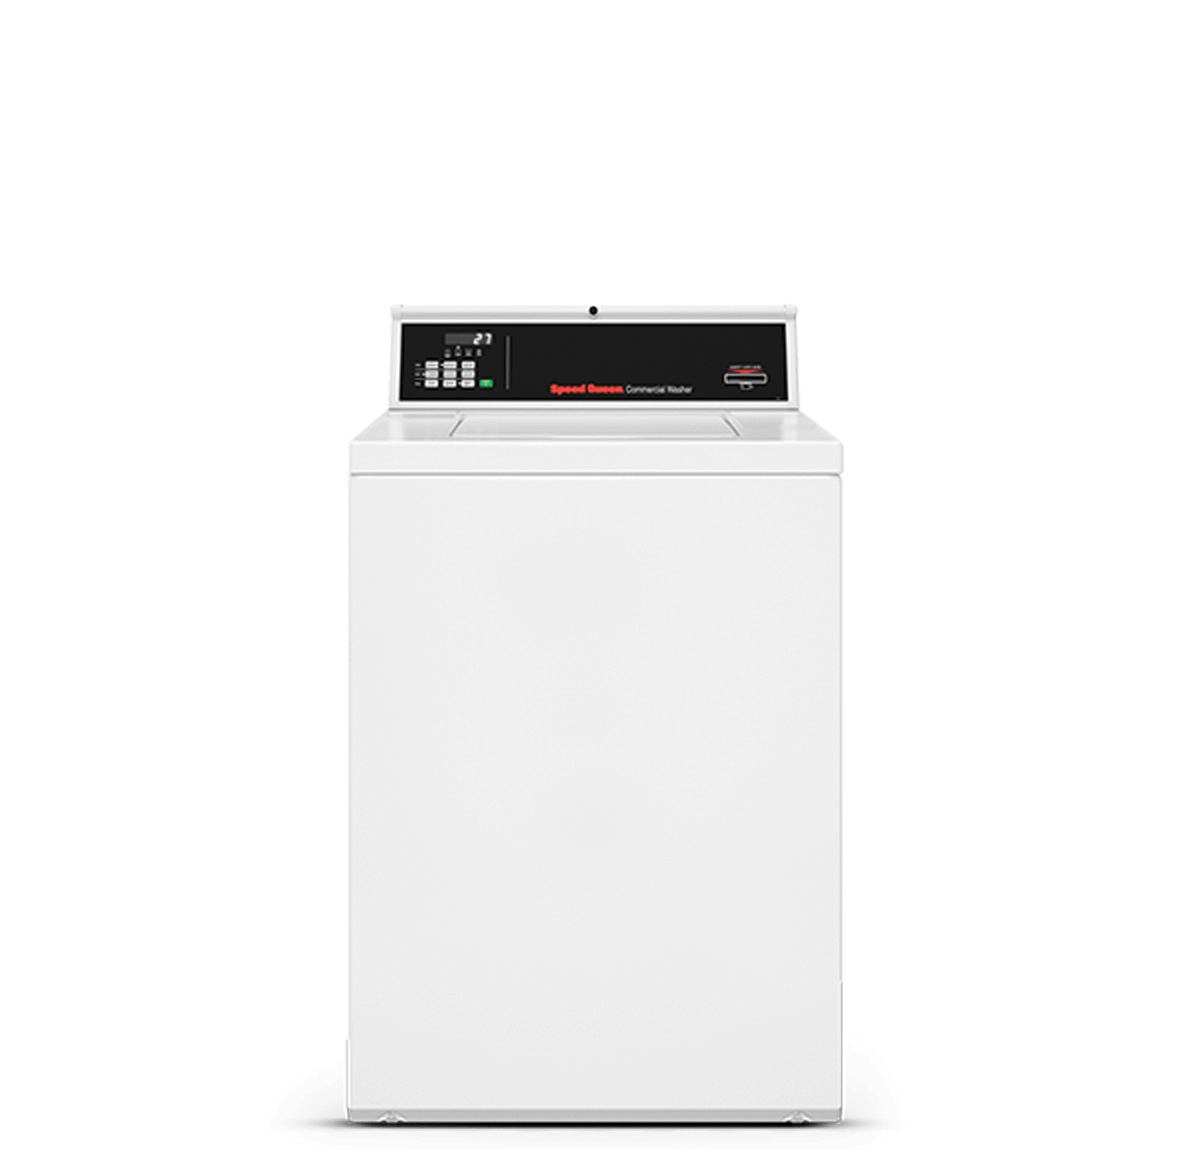 Maintain Commercial Washer Cleaner - The Unity Washer